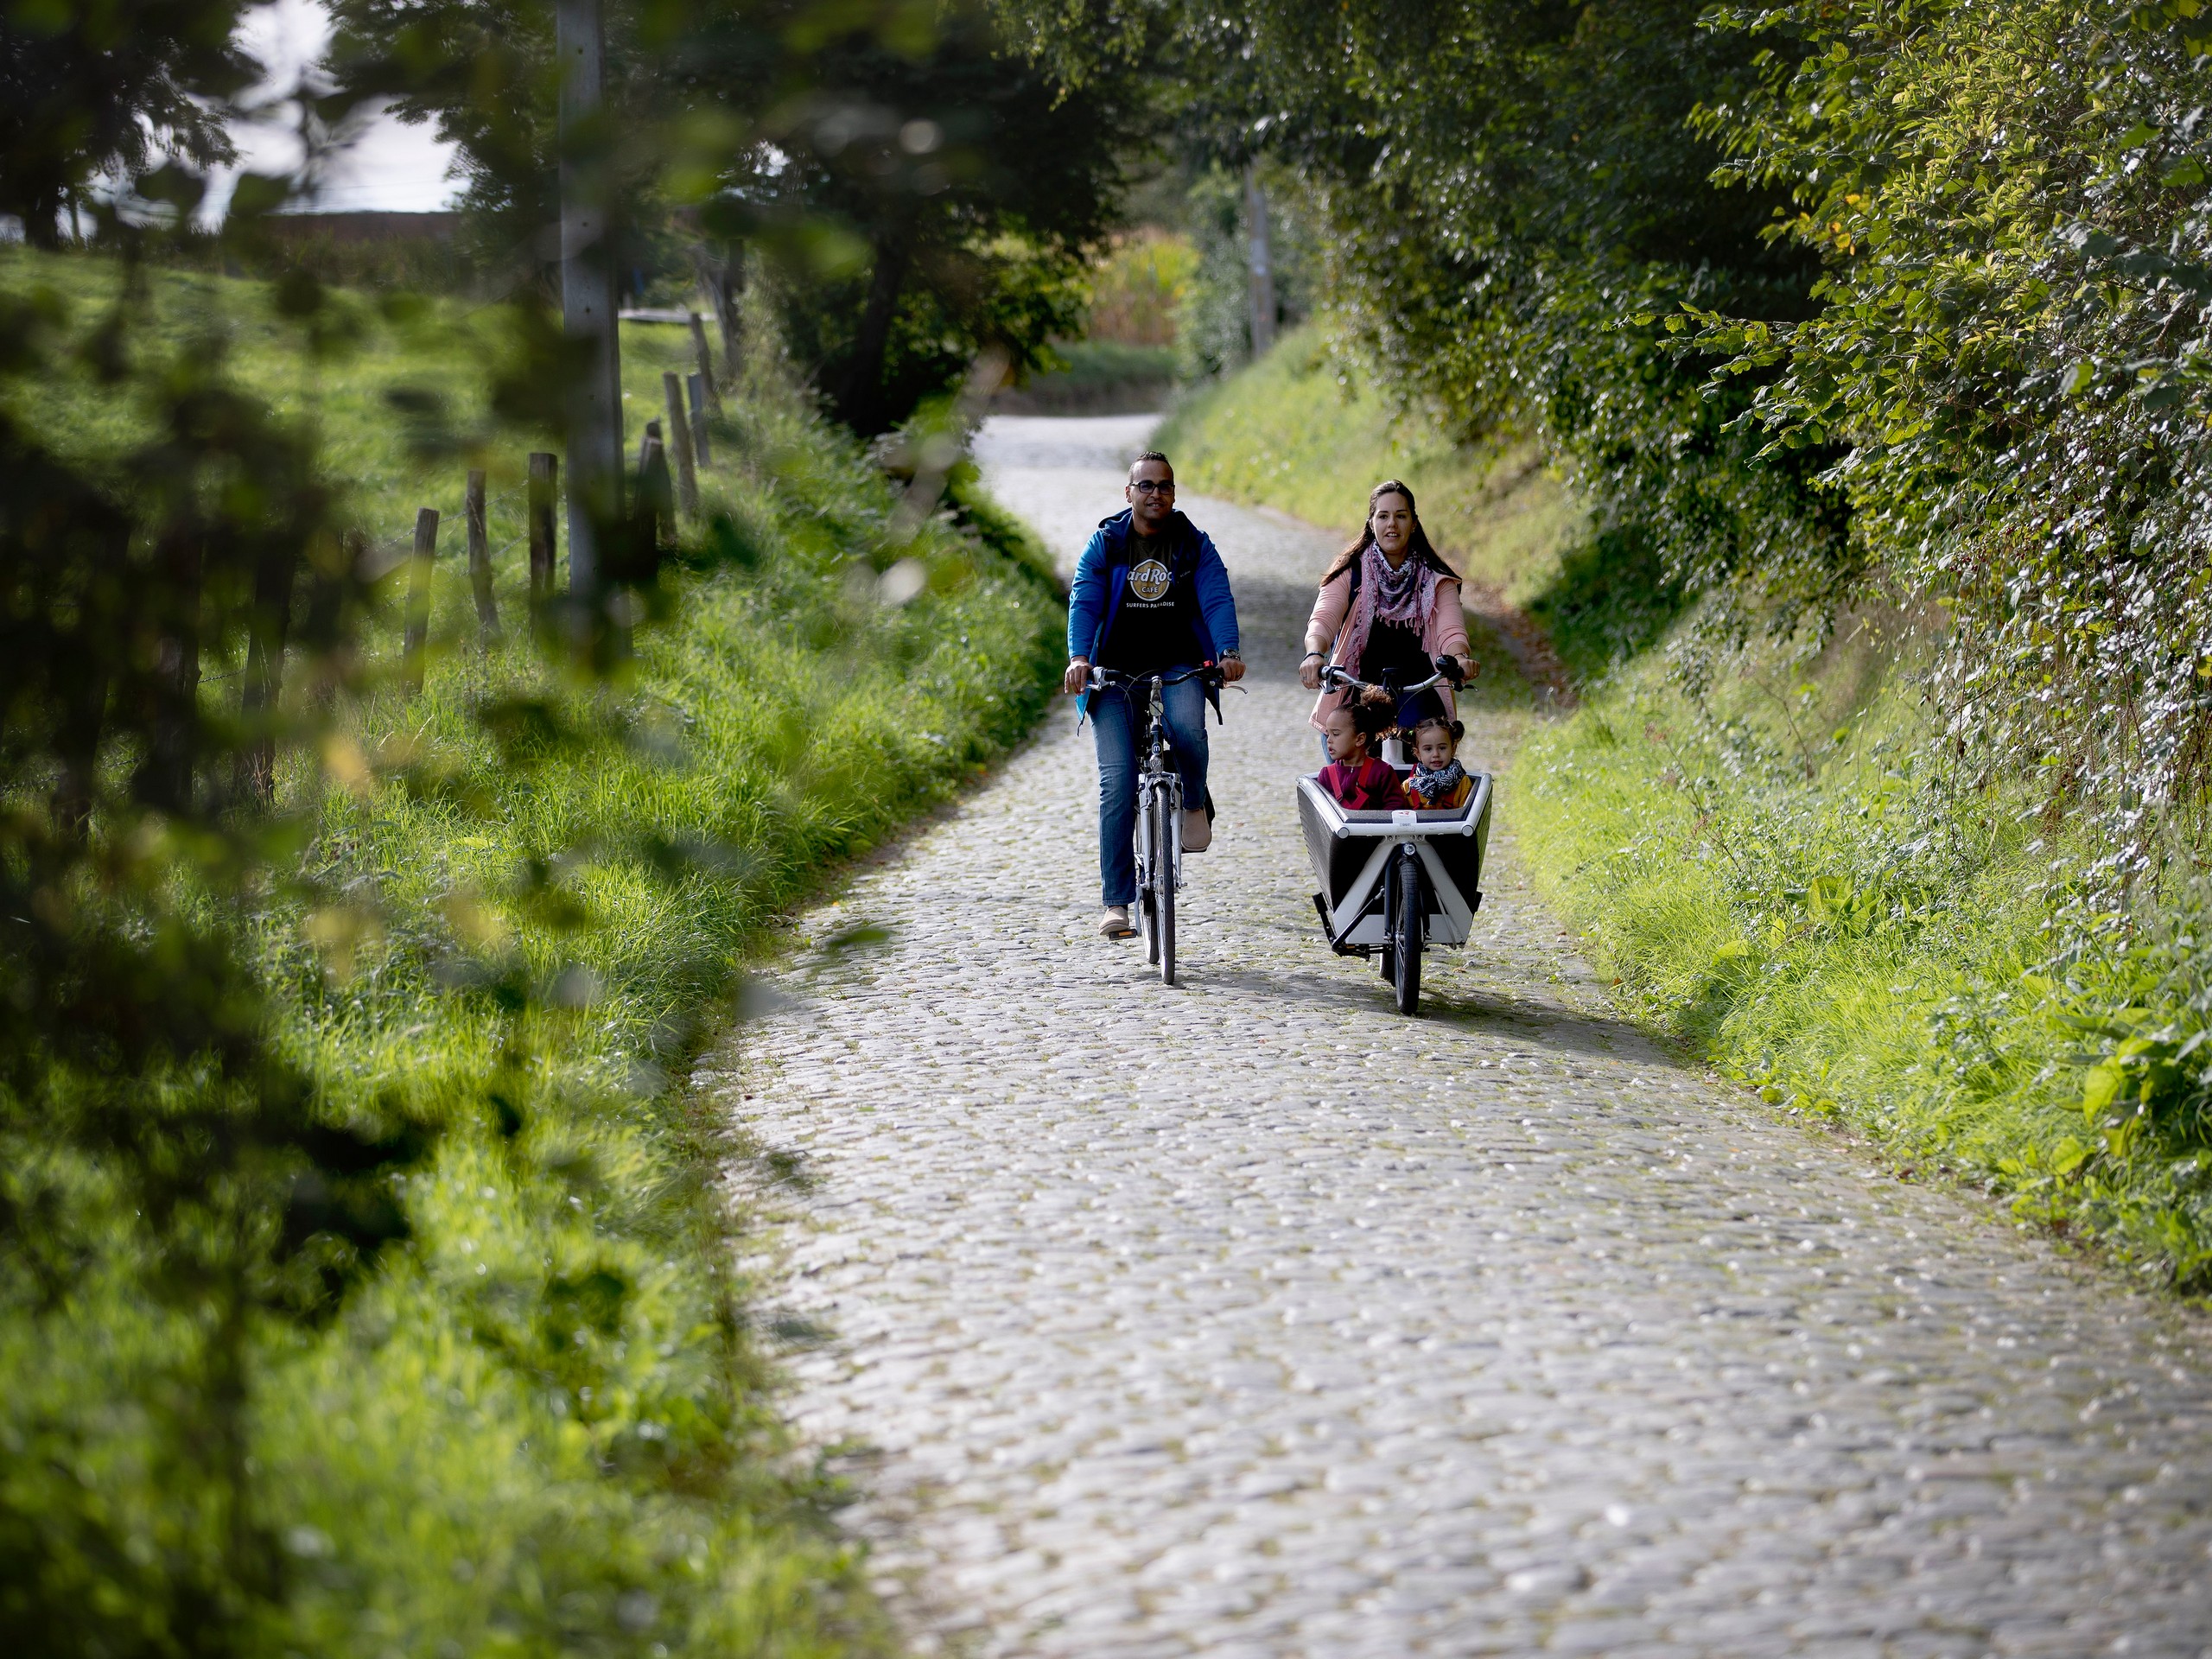 Cycling the path in Flanders